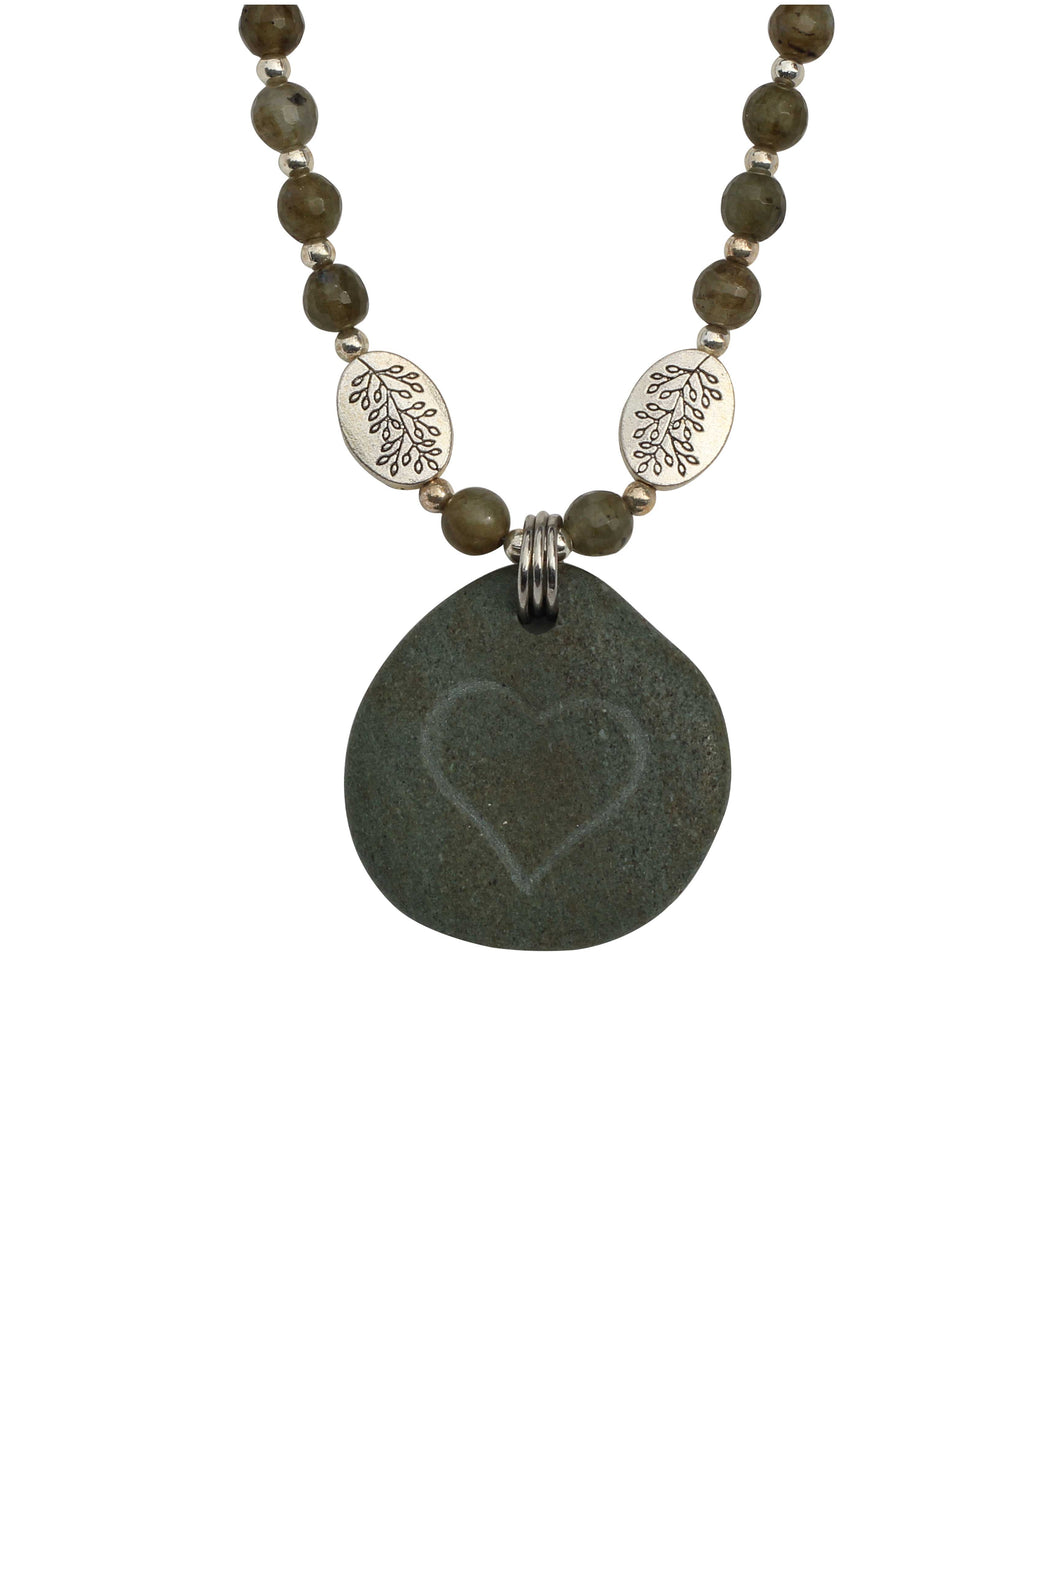 The River Heart Necklace